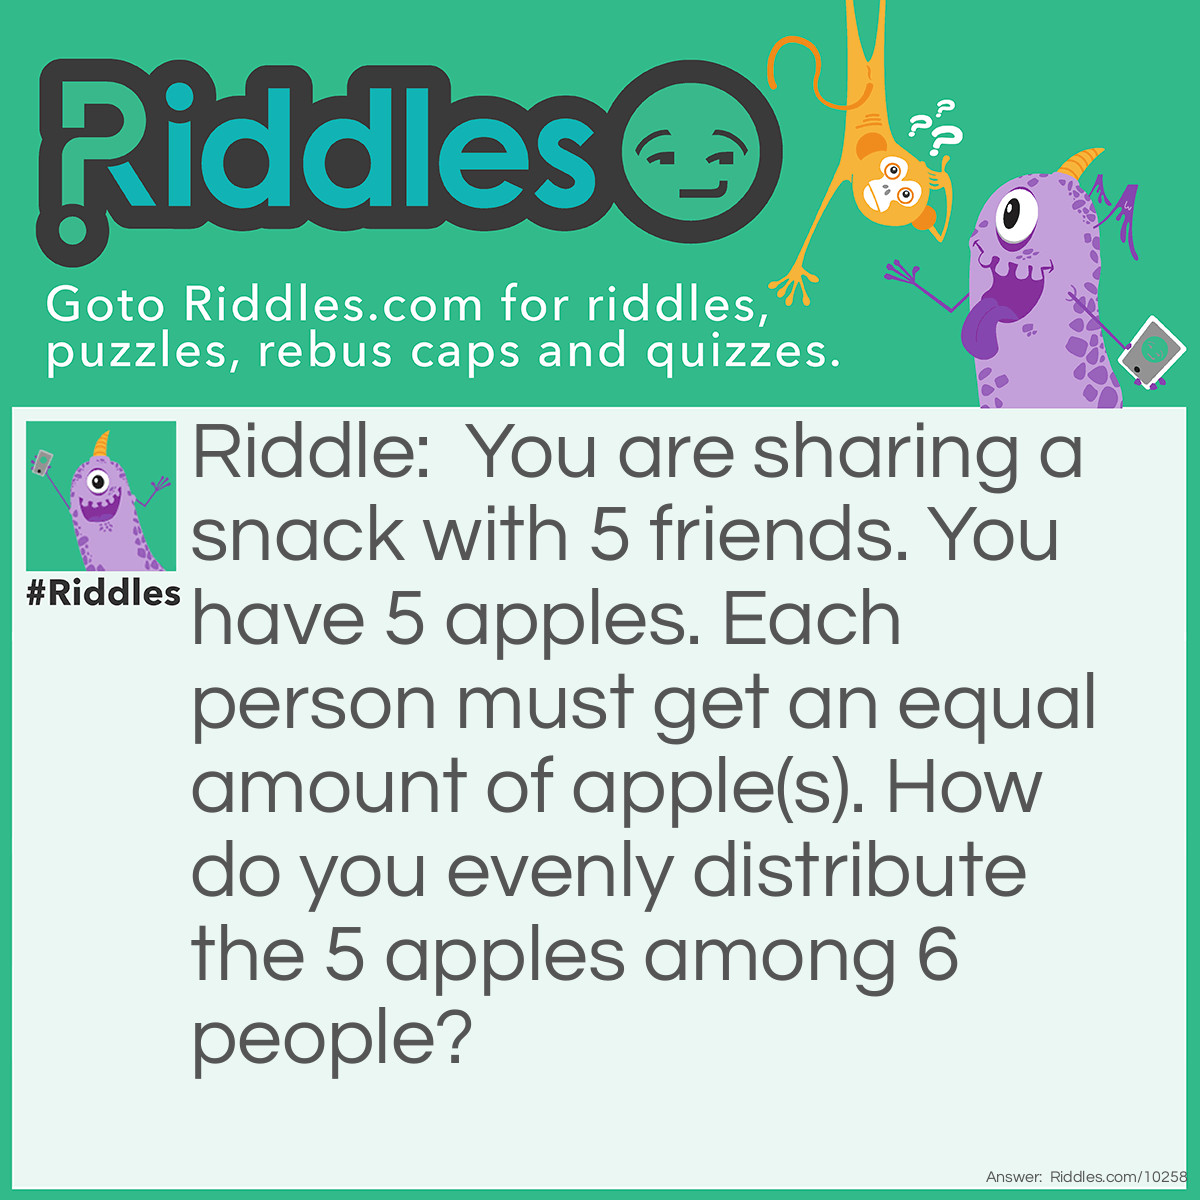 Riddle: You are sharing a snack with 5 friends. You have 5 apples. Each person must get an equal amount of apple(s). How do you evenly distribute the 5 apples among 6 people? Answer: Cut each apple into 6 peices. Each friend must take 5 slices or 1/6 of the number of slices.